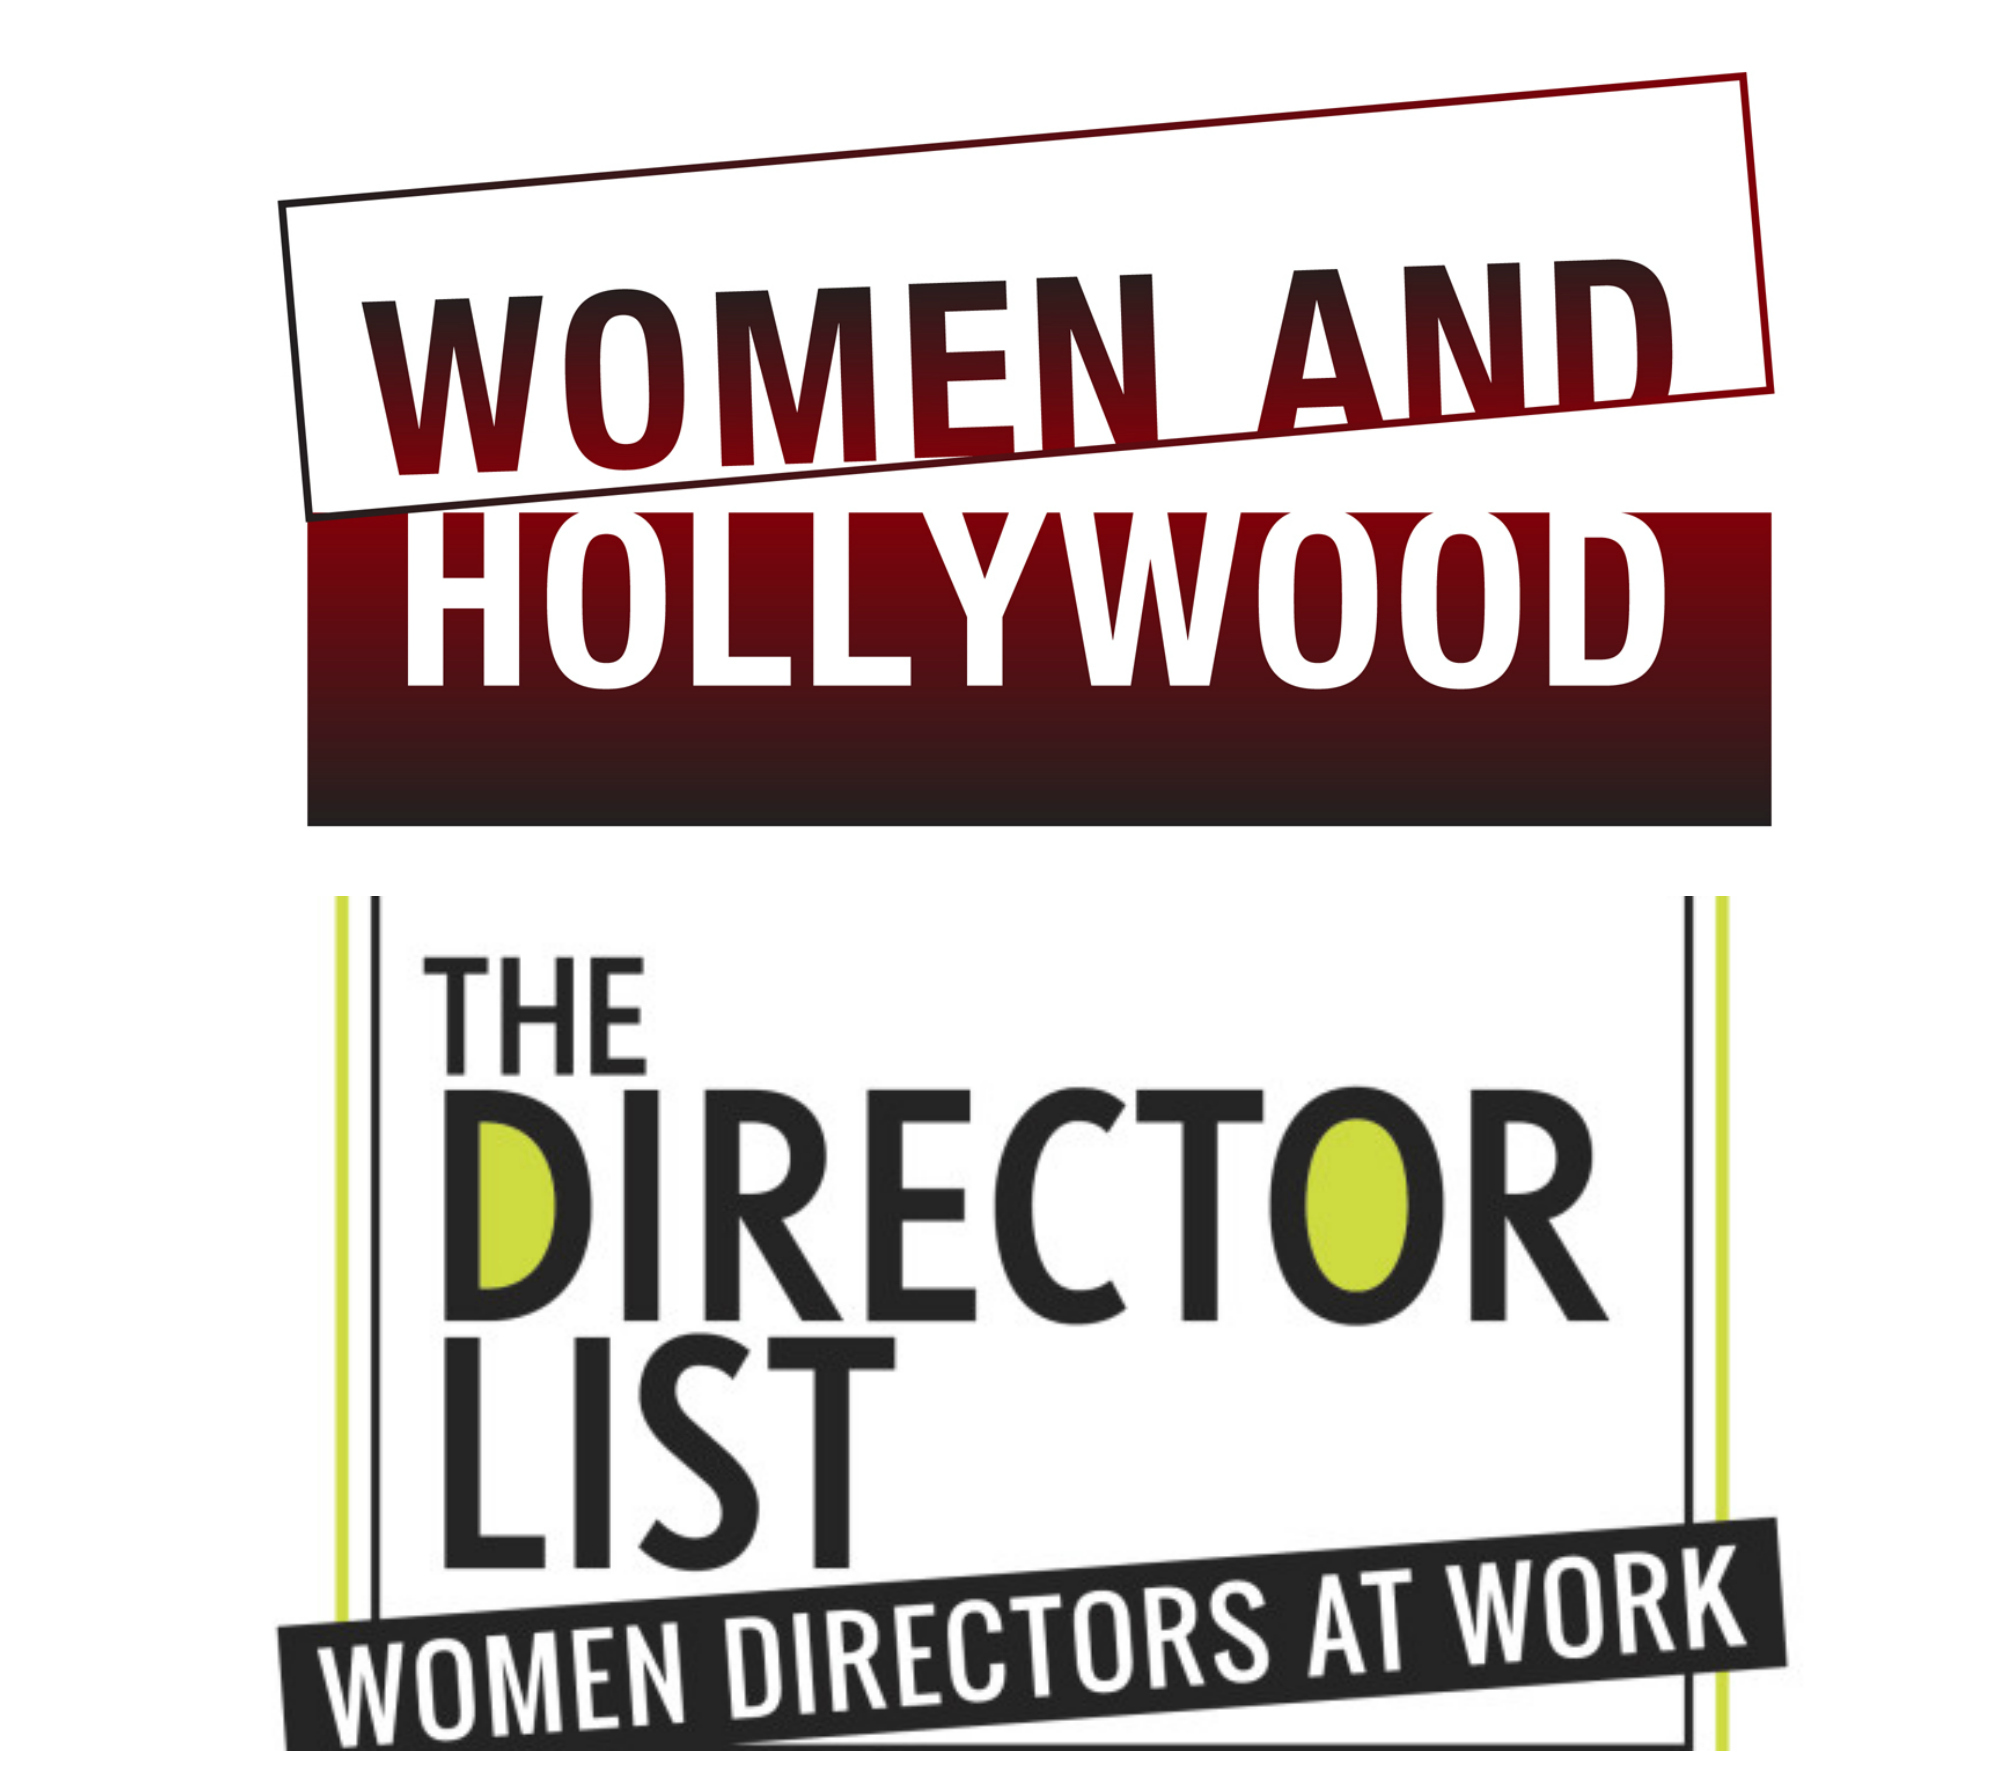 Women and Hollywood/Director List